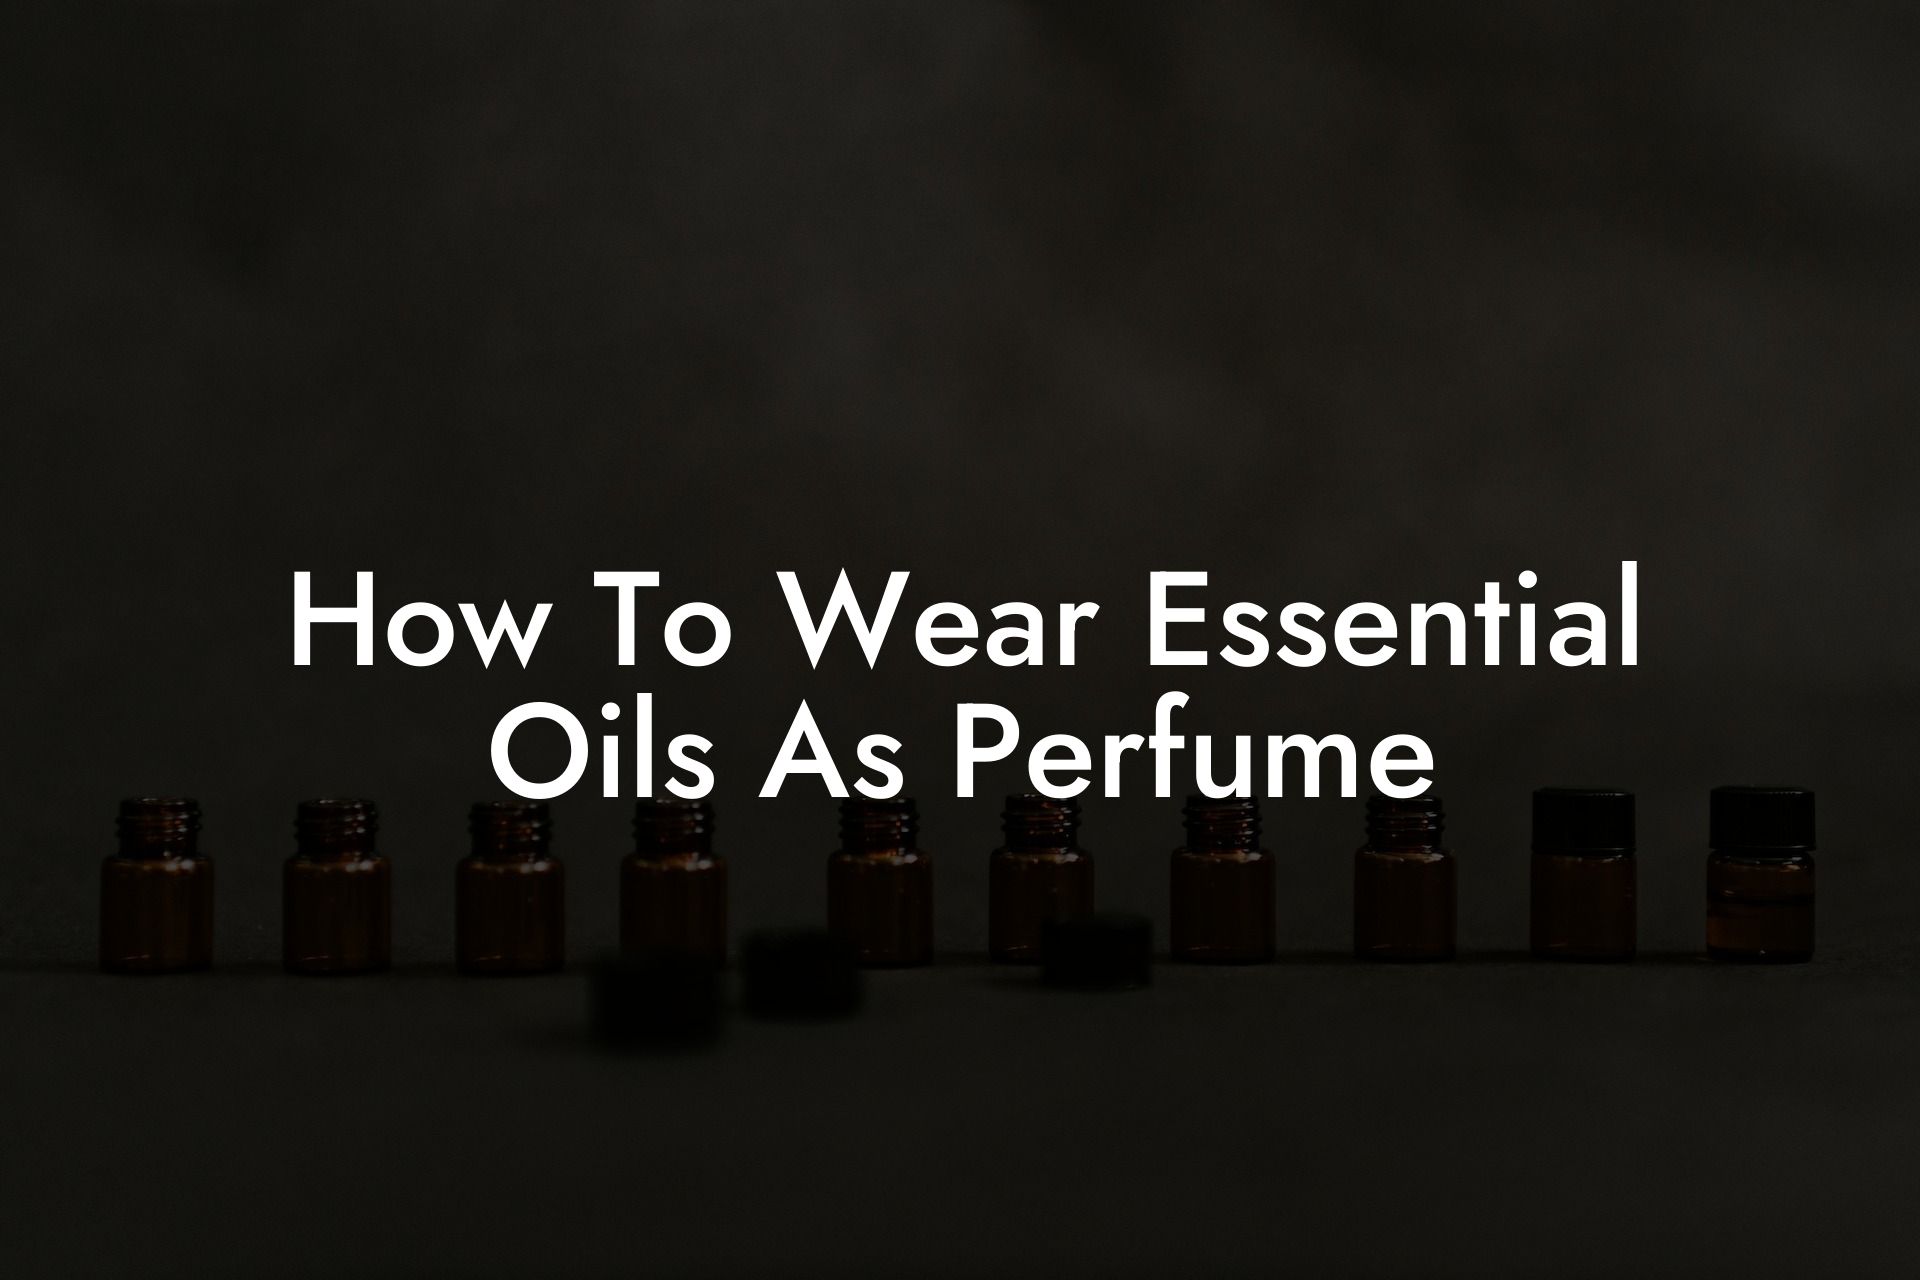 How To Wear Essential Oils As Perfume